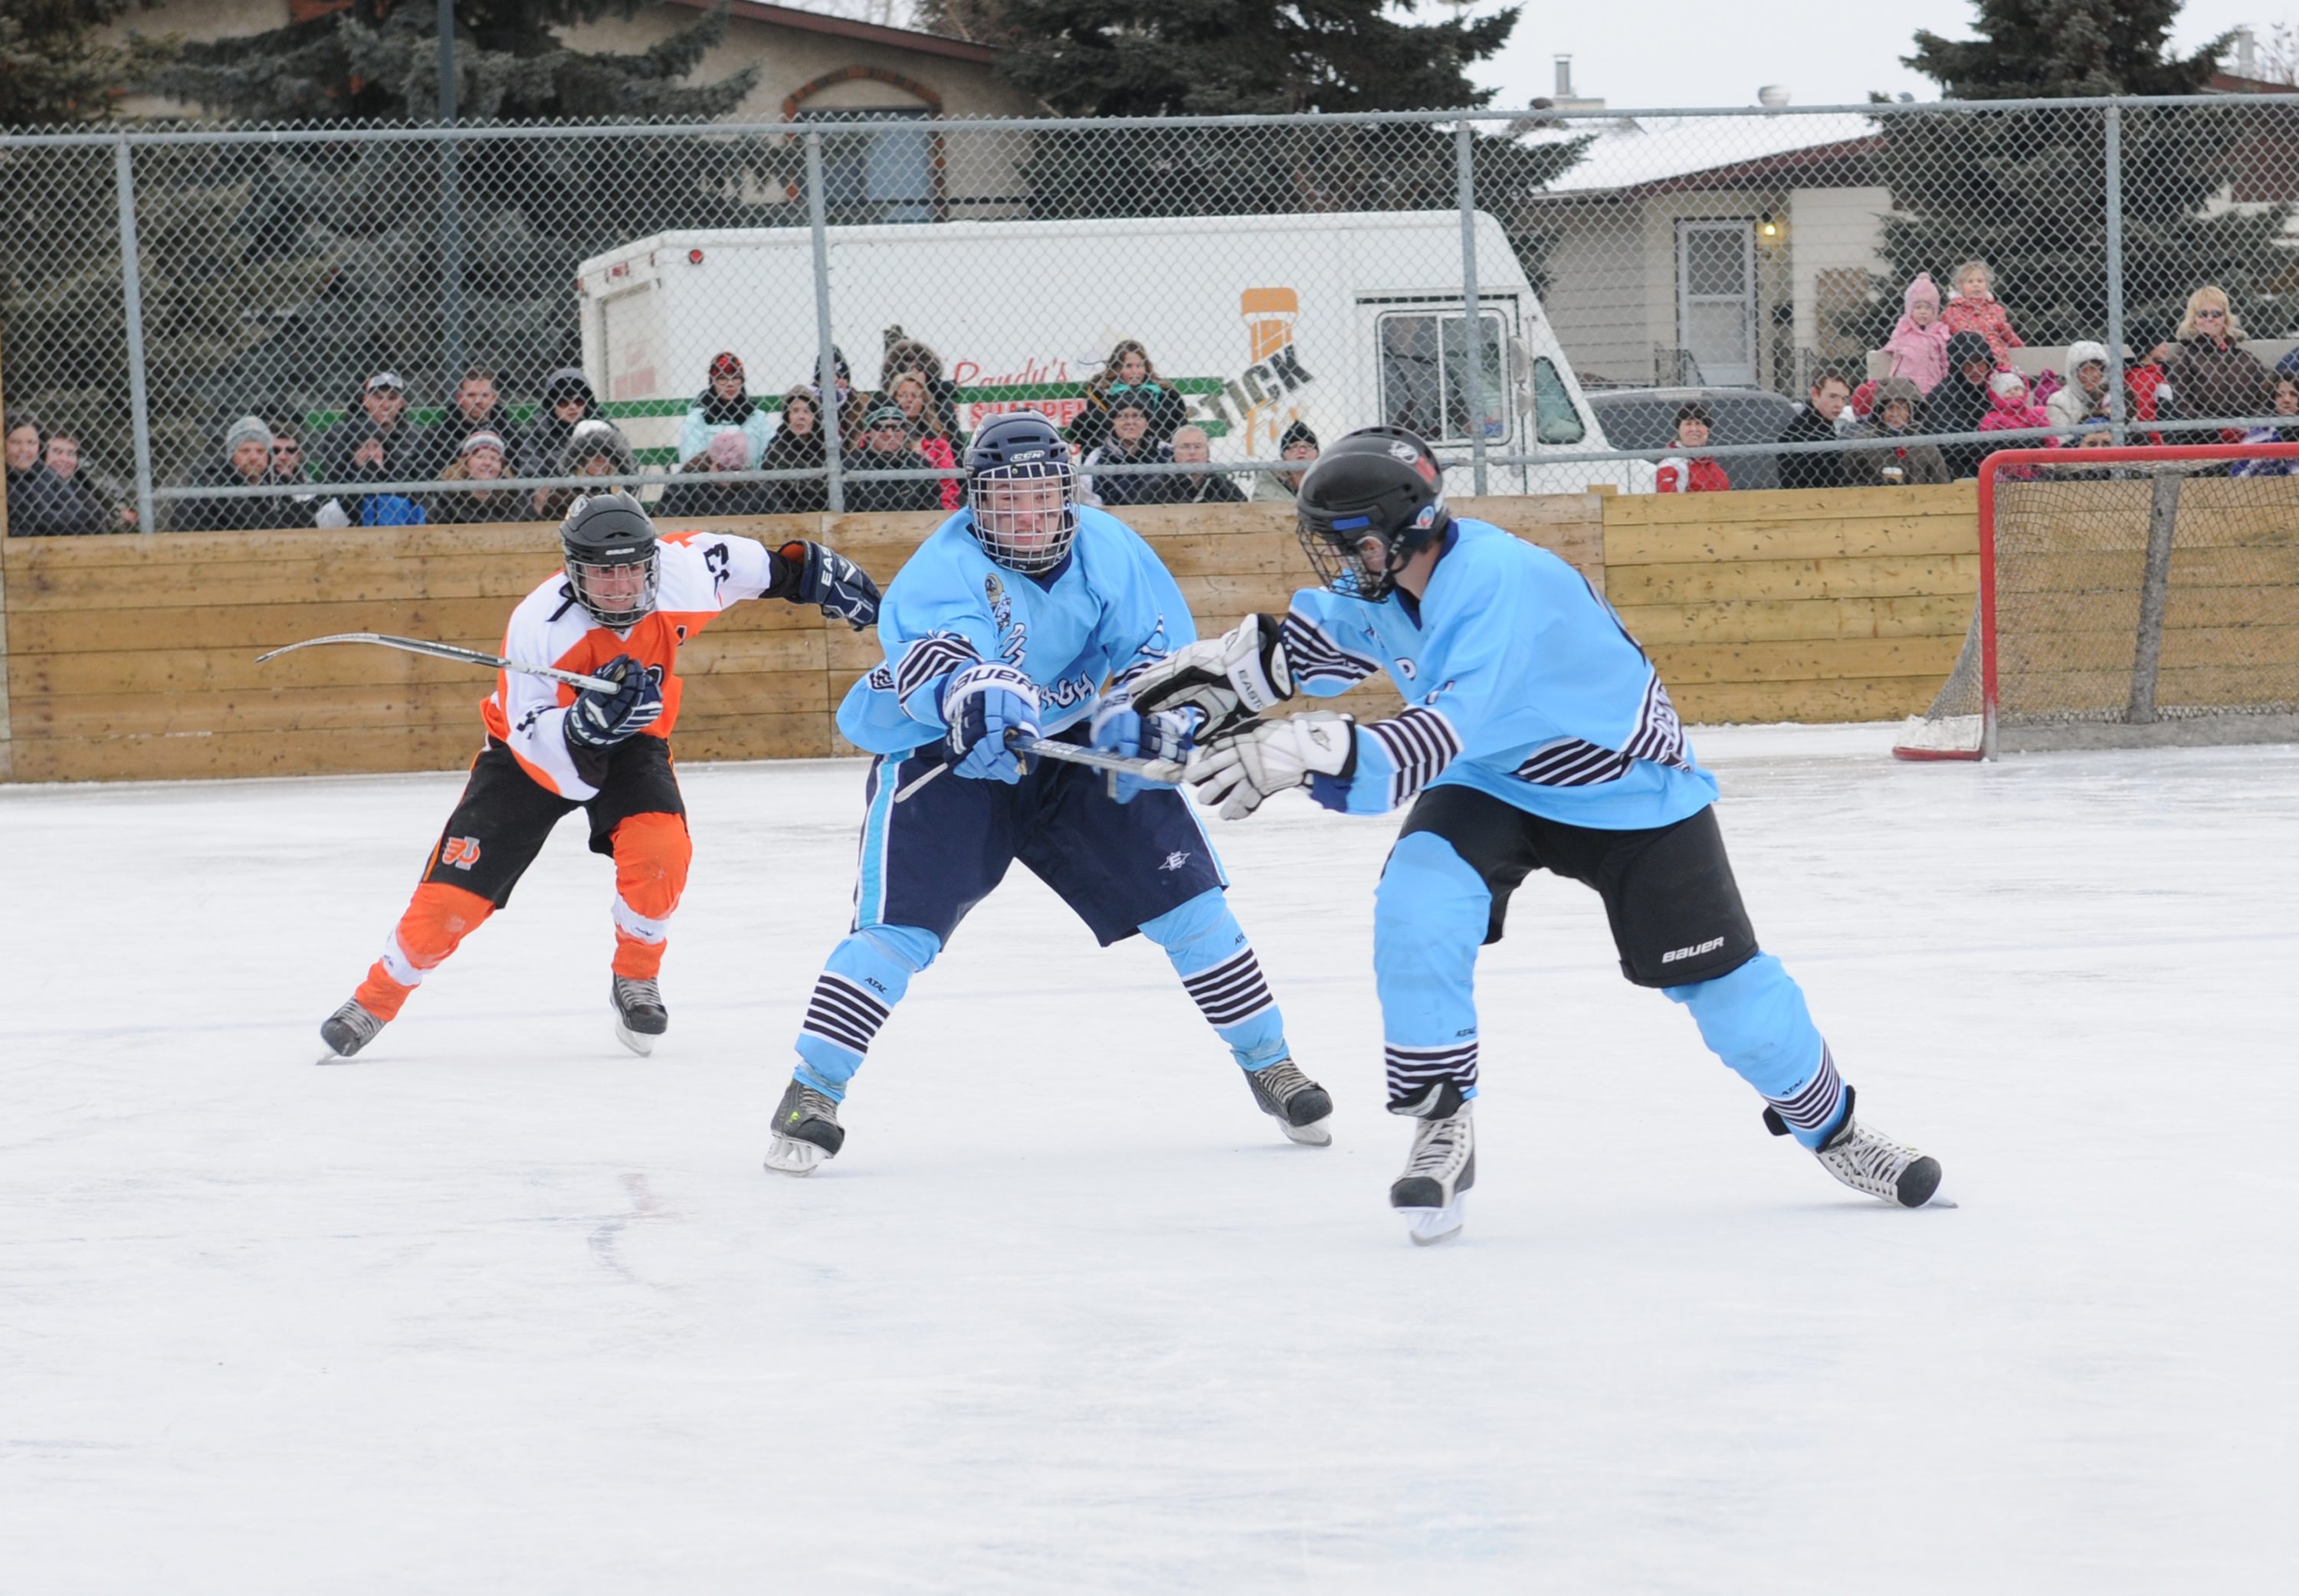 SPEEDY PASS- One of the events in the Red Deer Pond Hockey Skills Competition held this past weekend was a hockey stick relay where teams had to pass off the stick and make their way around the rink before the other team.